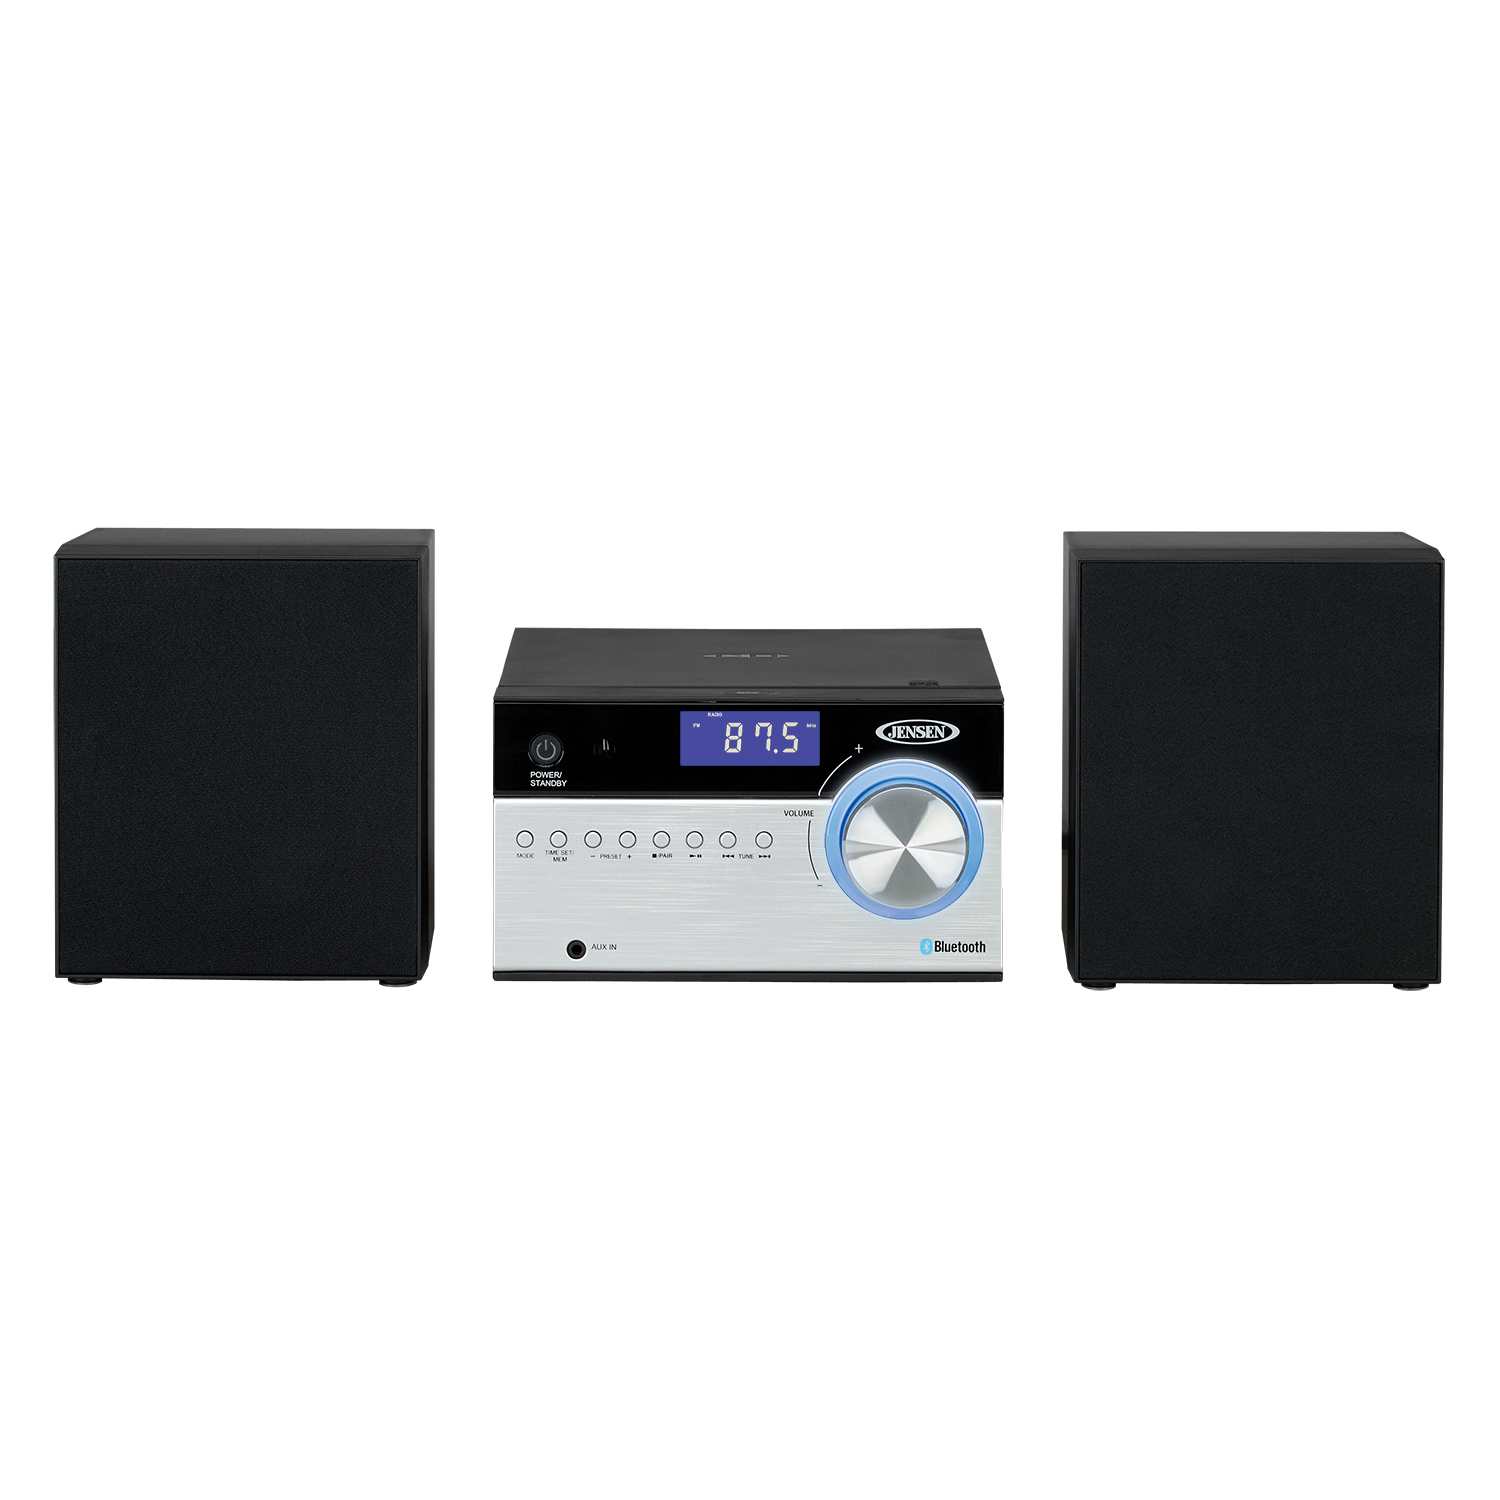 Jensen Bluetooth CD Music System with Digital AM/FM Stereo Receiver - JBS-200 - image 2 of 4